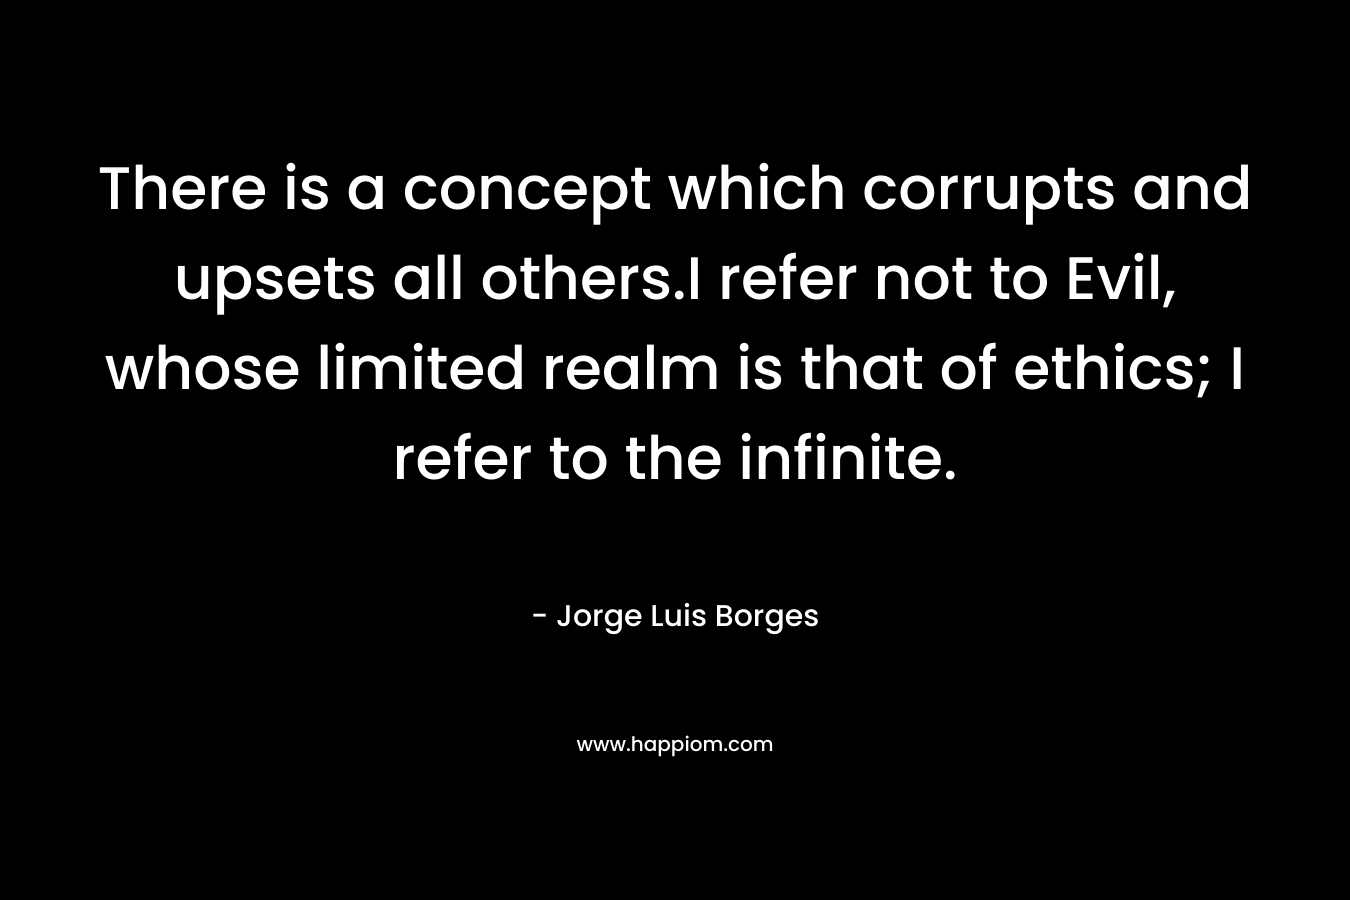 There is a concept which corrupts and upsets all others.I refer not to Evil, whose limited realm is that of ethics; I refer to the infinite.